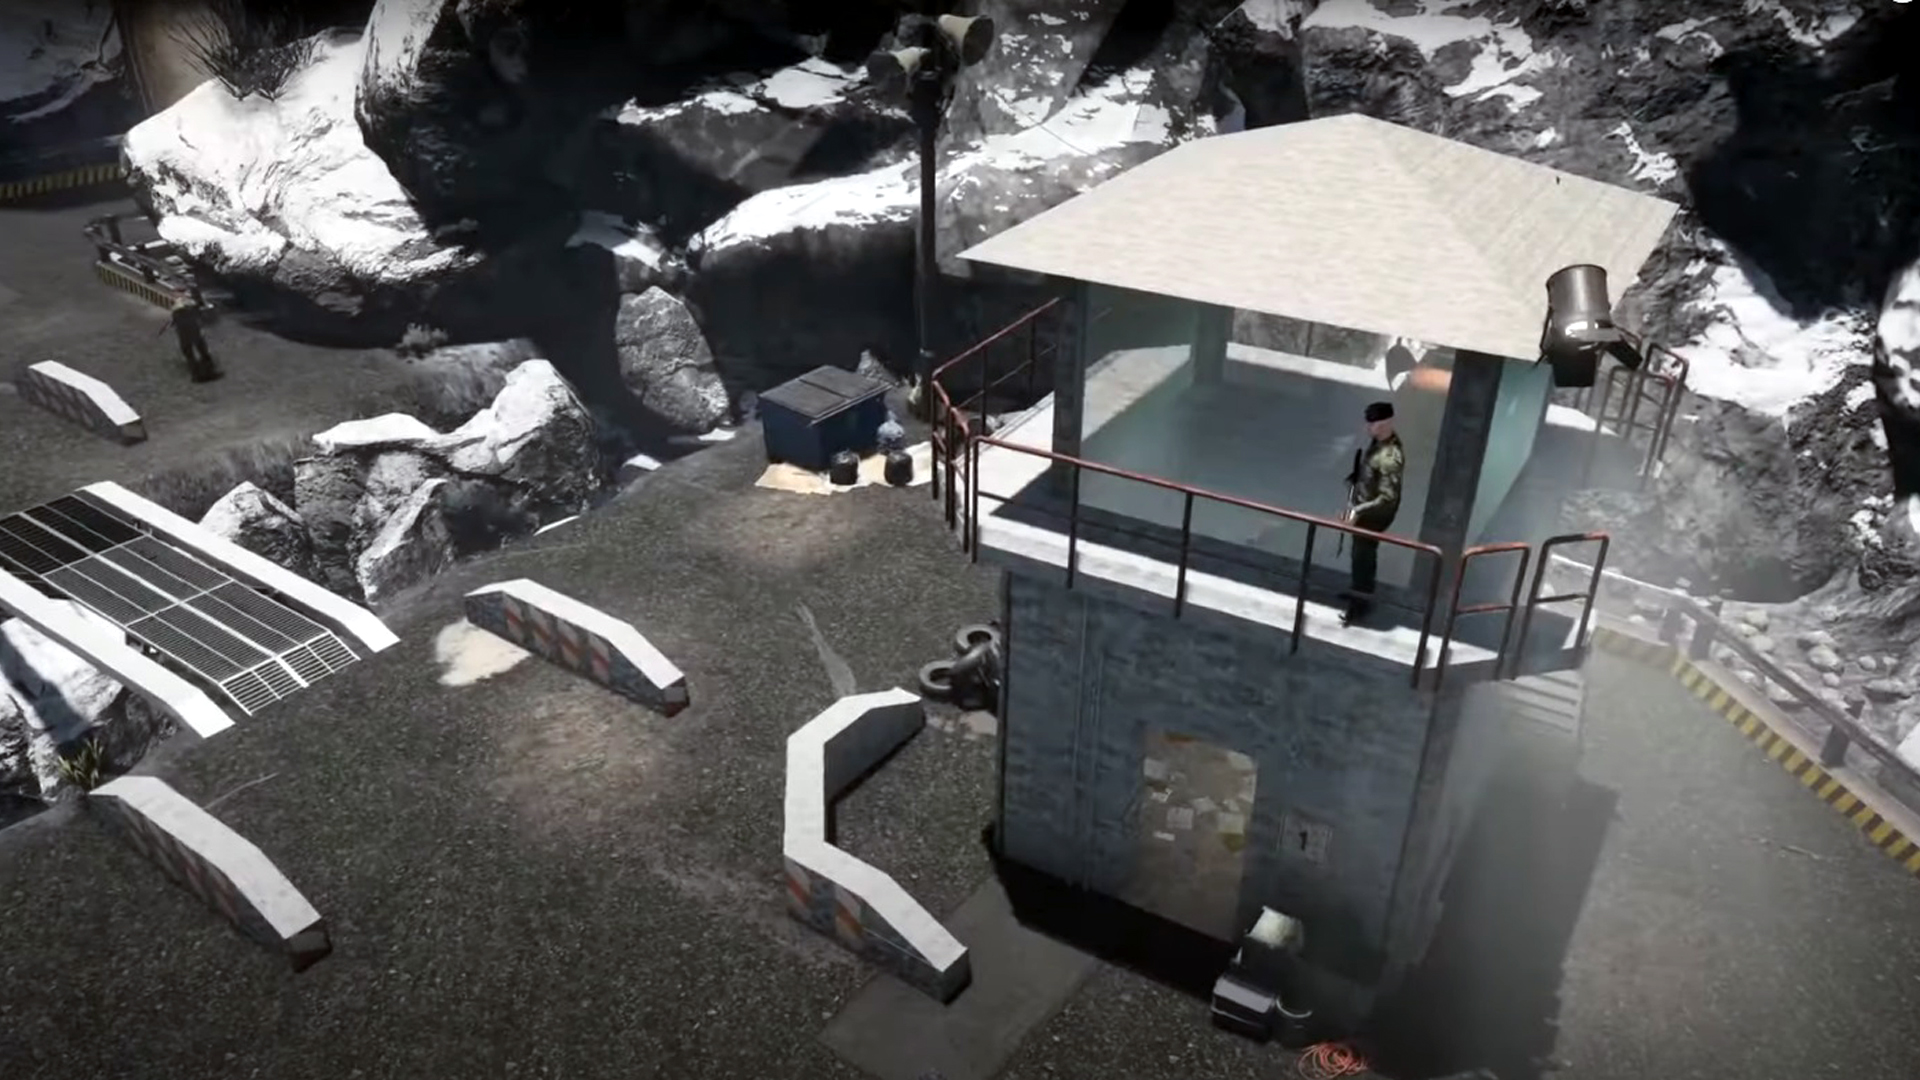 It took three years to remake GoldenEye in Far Cry 5 only for Ubisoft to pull it